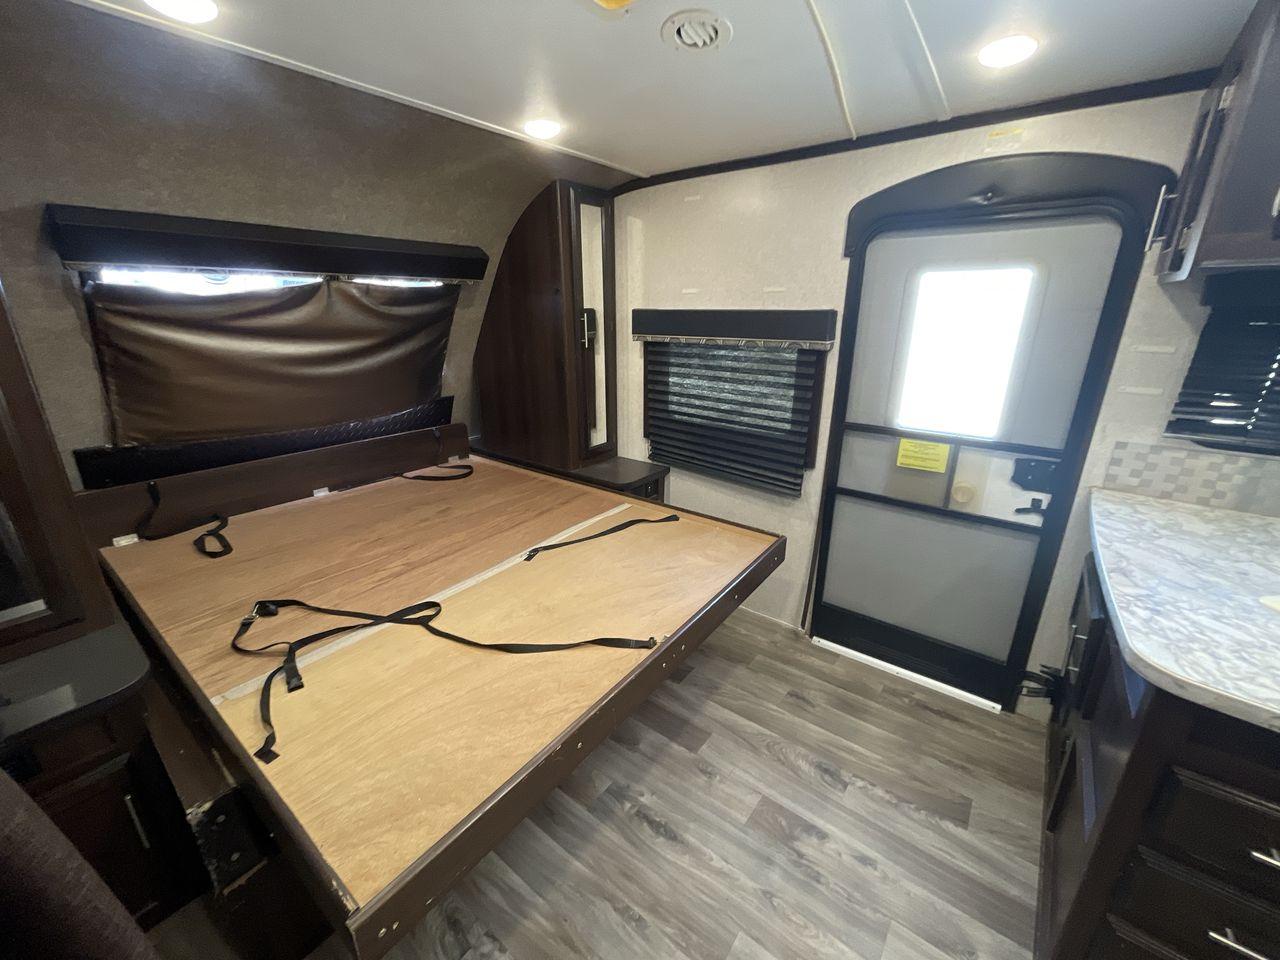 2018 WHITE JAYCO JAY FLIGHT 23MRB (1UJBJ0BN5J1) , Length: 28.17 ft | Dry Weight: 5,560 lbs. | Gross Weight: 7,250 lbs. | Slides: 1 transmission, located at 4319 N Main St, Cleburne, TX, 76033, (817) 678-5133, 32.385960, -97.391212 - The 2018 Jayco Jay Flight 23MRB is a travel trailer that encapsulates both compactness and luxury for unparalleled camping experiences. Spanning 28 feet in length, this model boasts a thoughtfully arranged interior featuring a single slide-out, seamlessly amplifying the living space. The Jay Flight - Photo #18